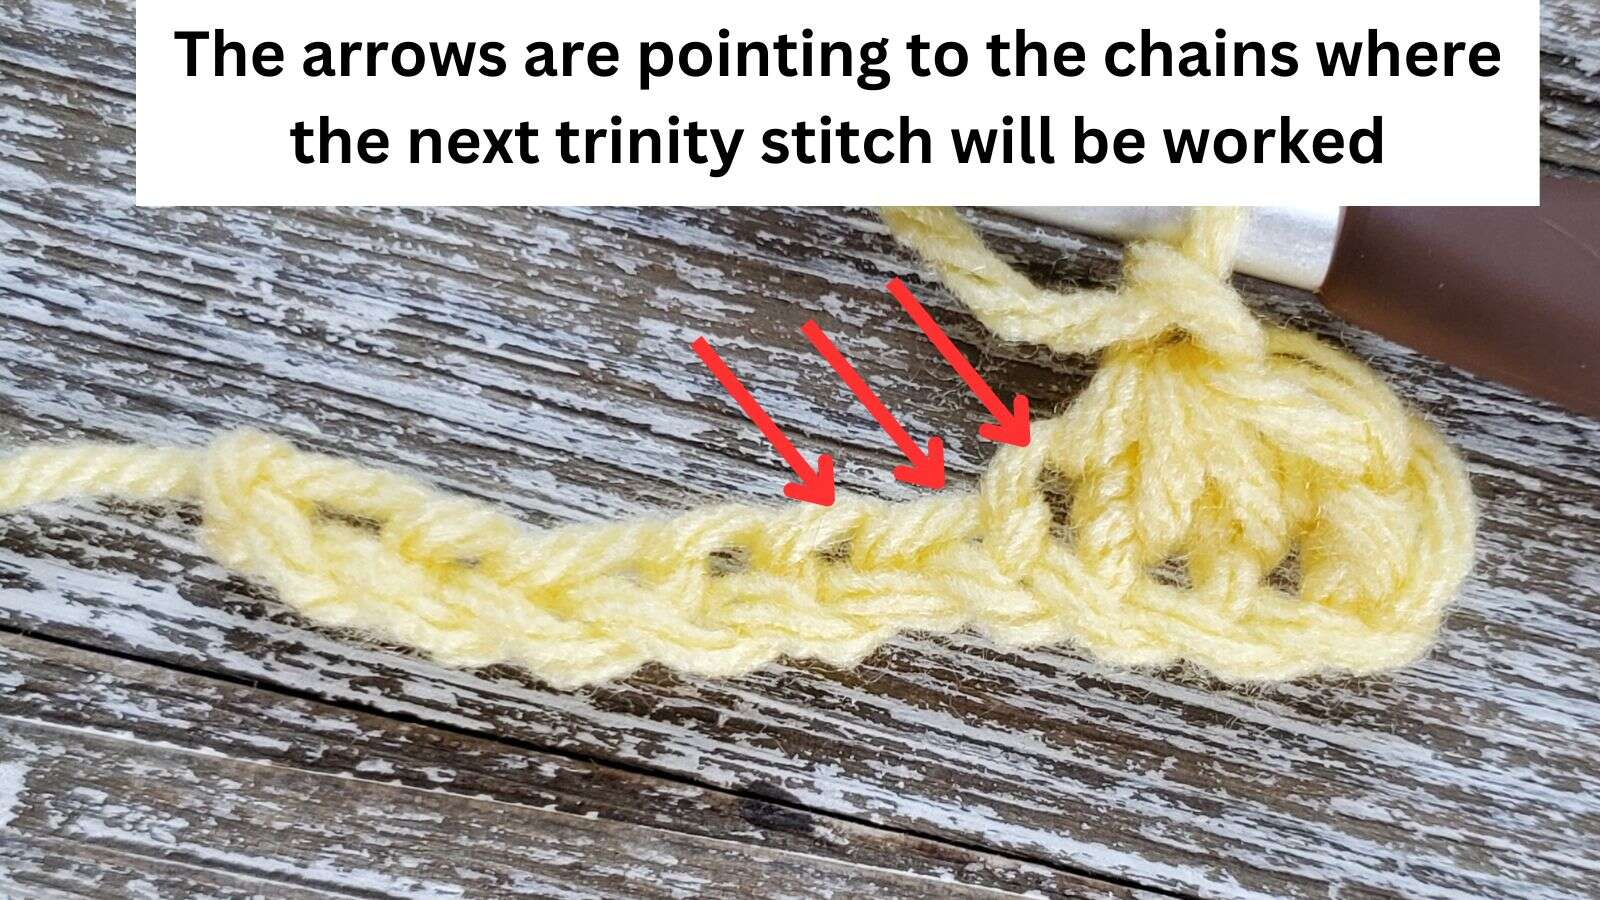 Arrows pointing to the chains where the next trinity stitch will be worked